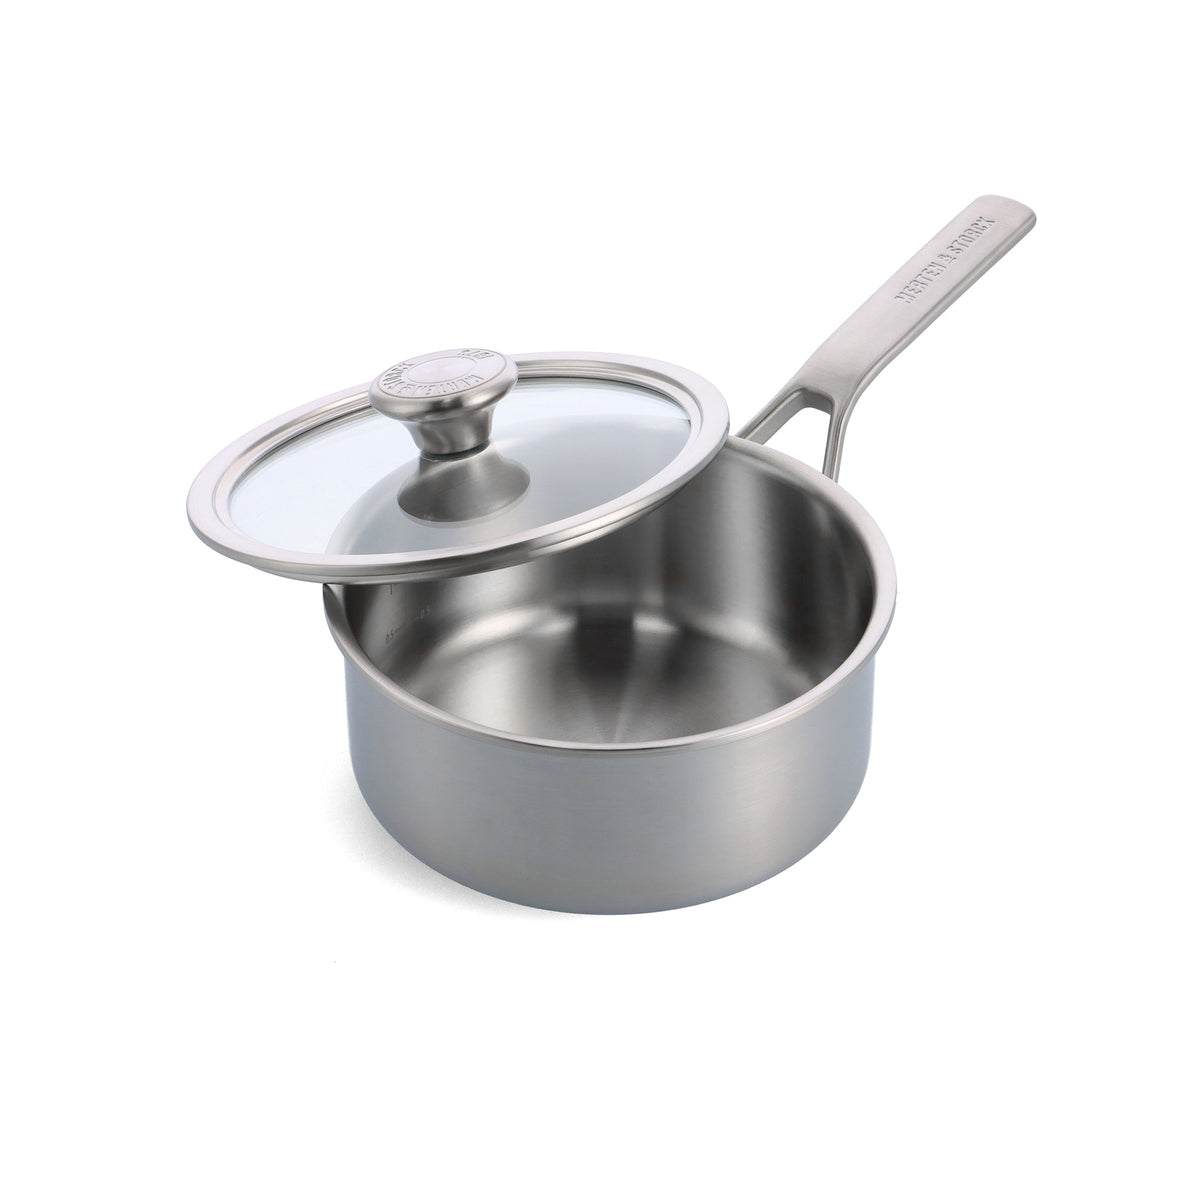 Original-Profi Collection® Stainless Steel Saucepan with Lid, 1.5